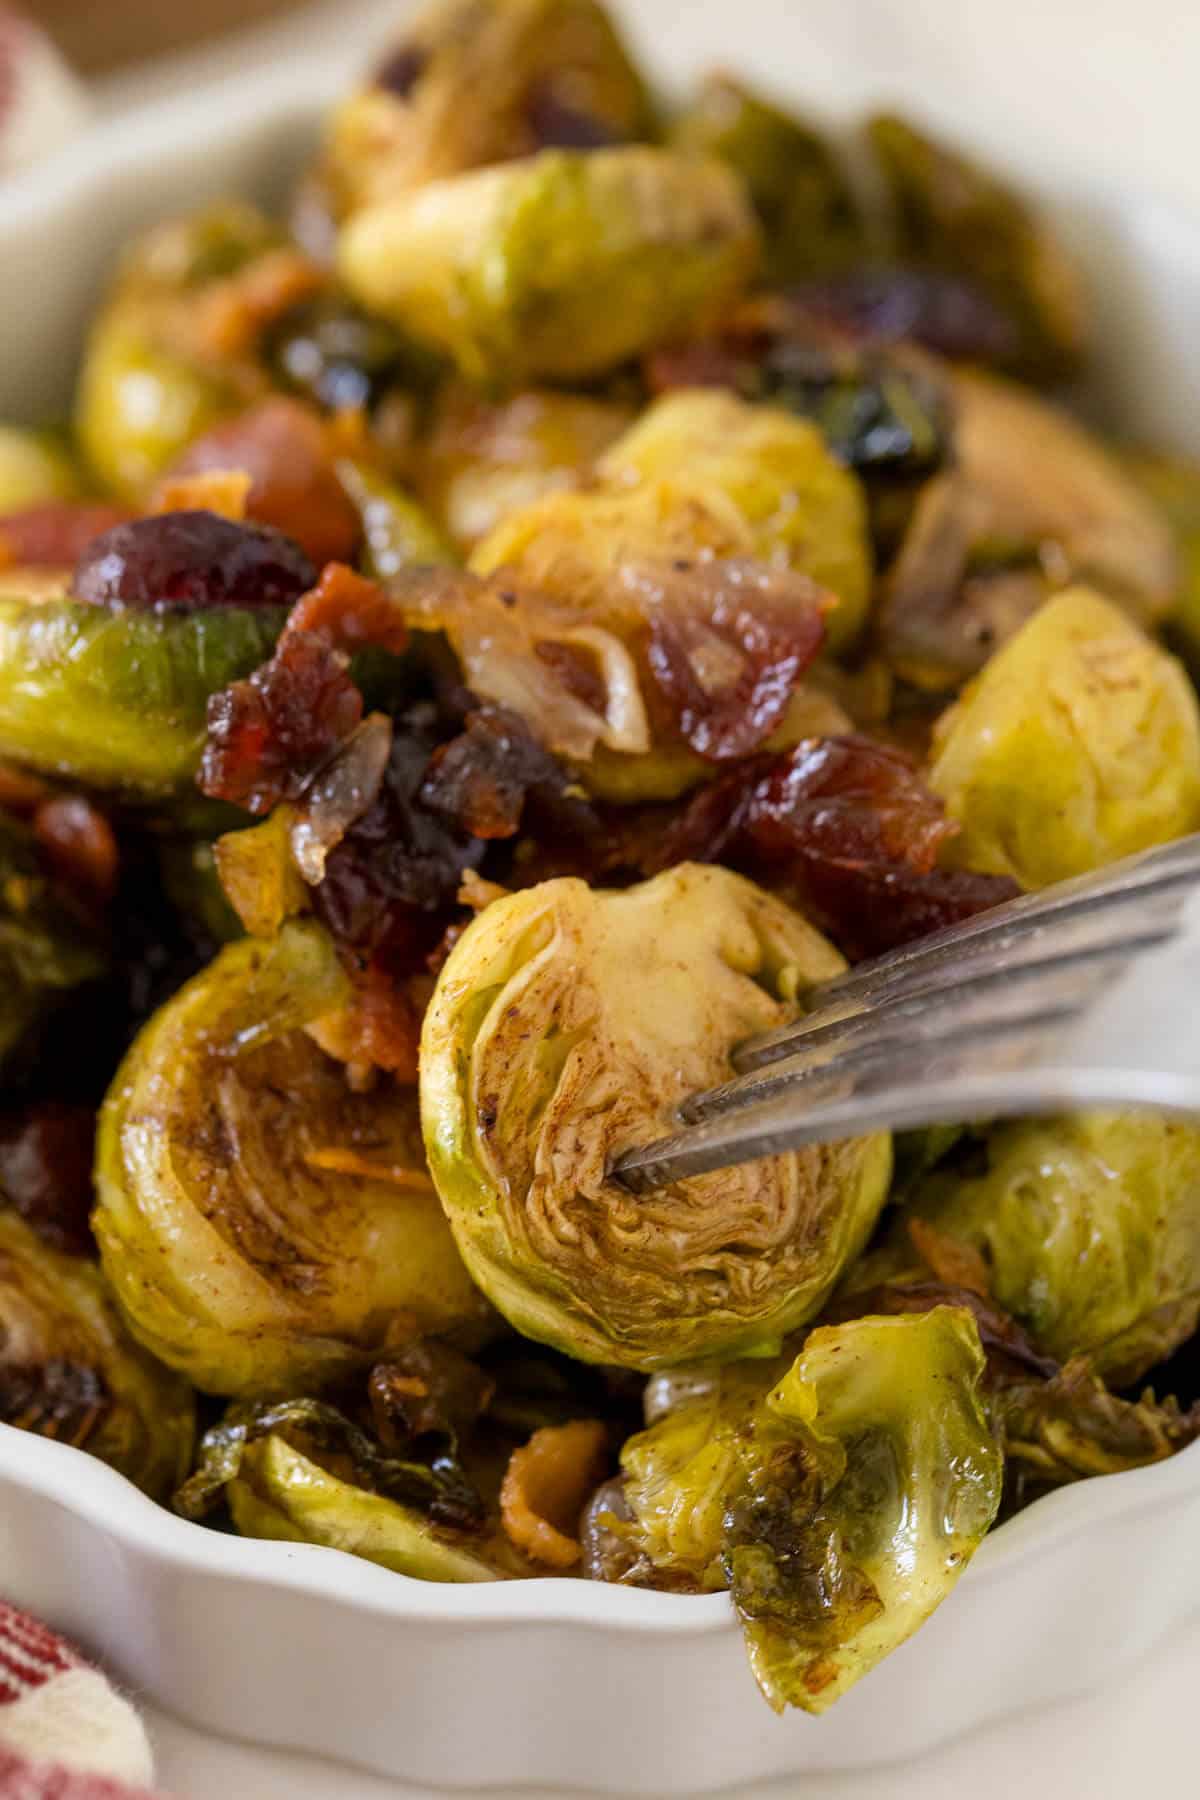 Roasted brussel sprouts on a fork.